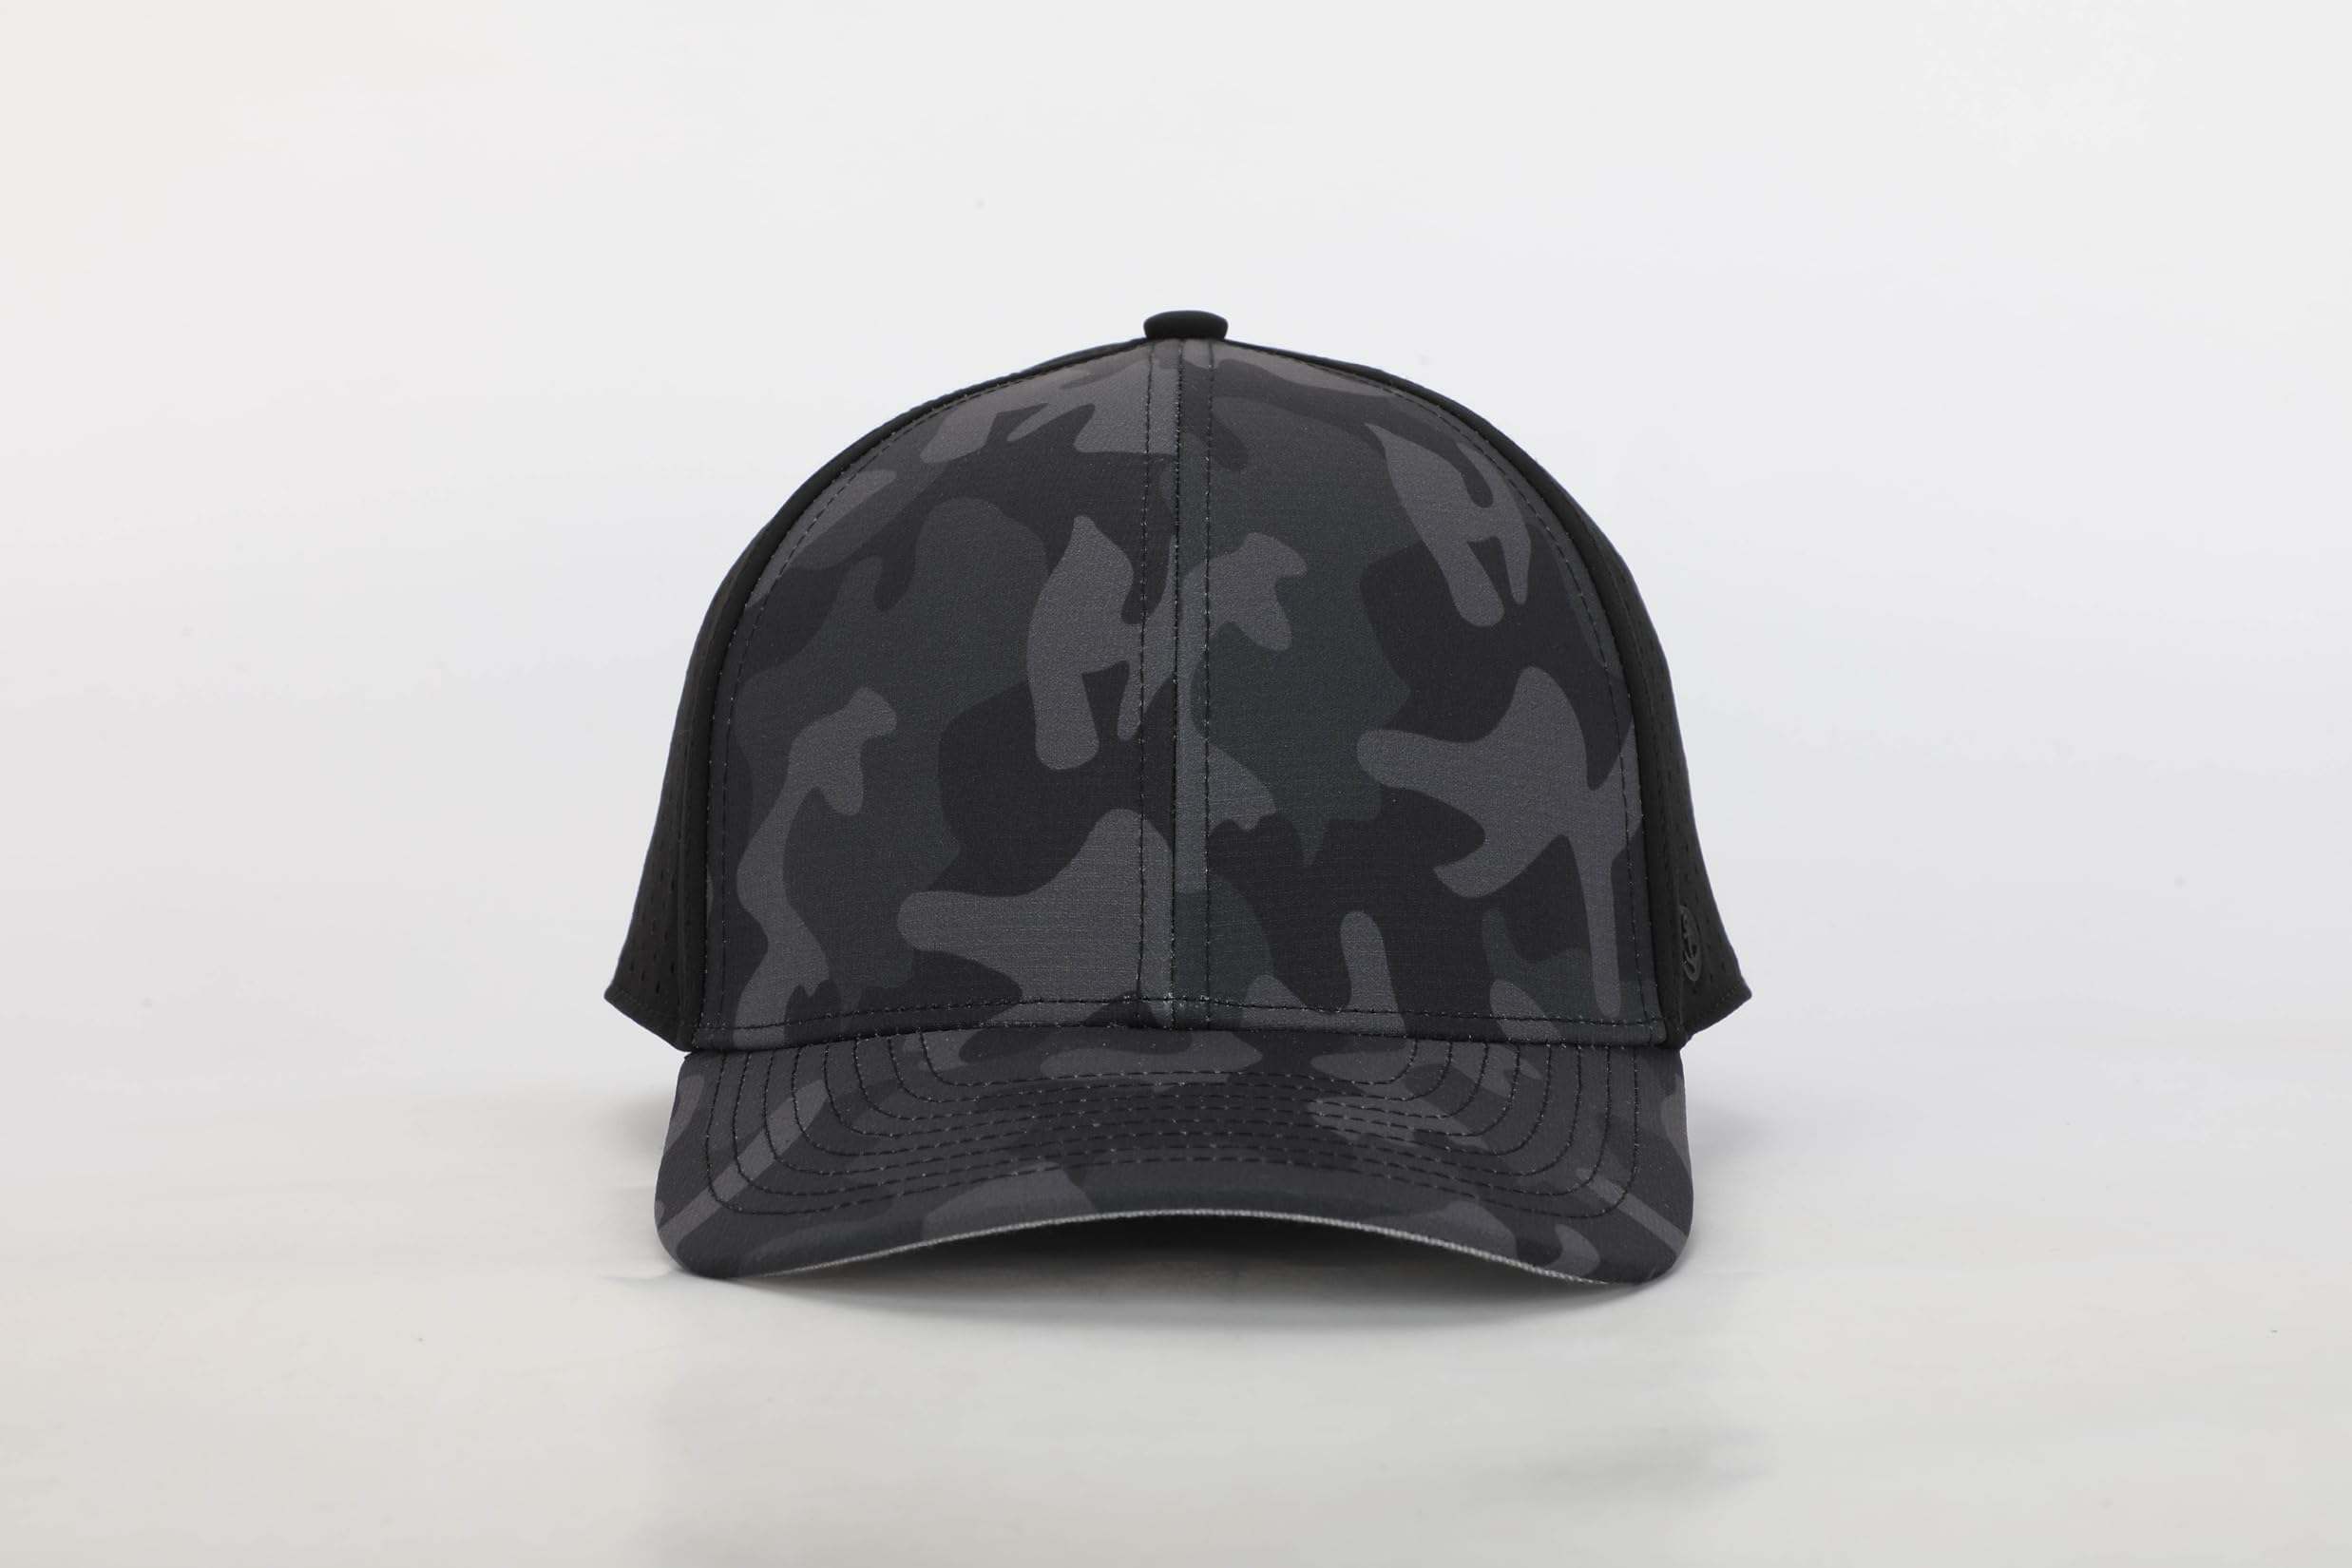 ANKOR Ultra Performance Water-Resistant UPF 50 Baseball Hat | Golf | Boat | Beach | Lake | Workout | Everyday | Men and Women (Black Camo)